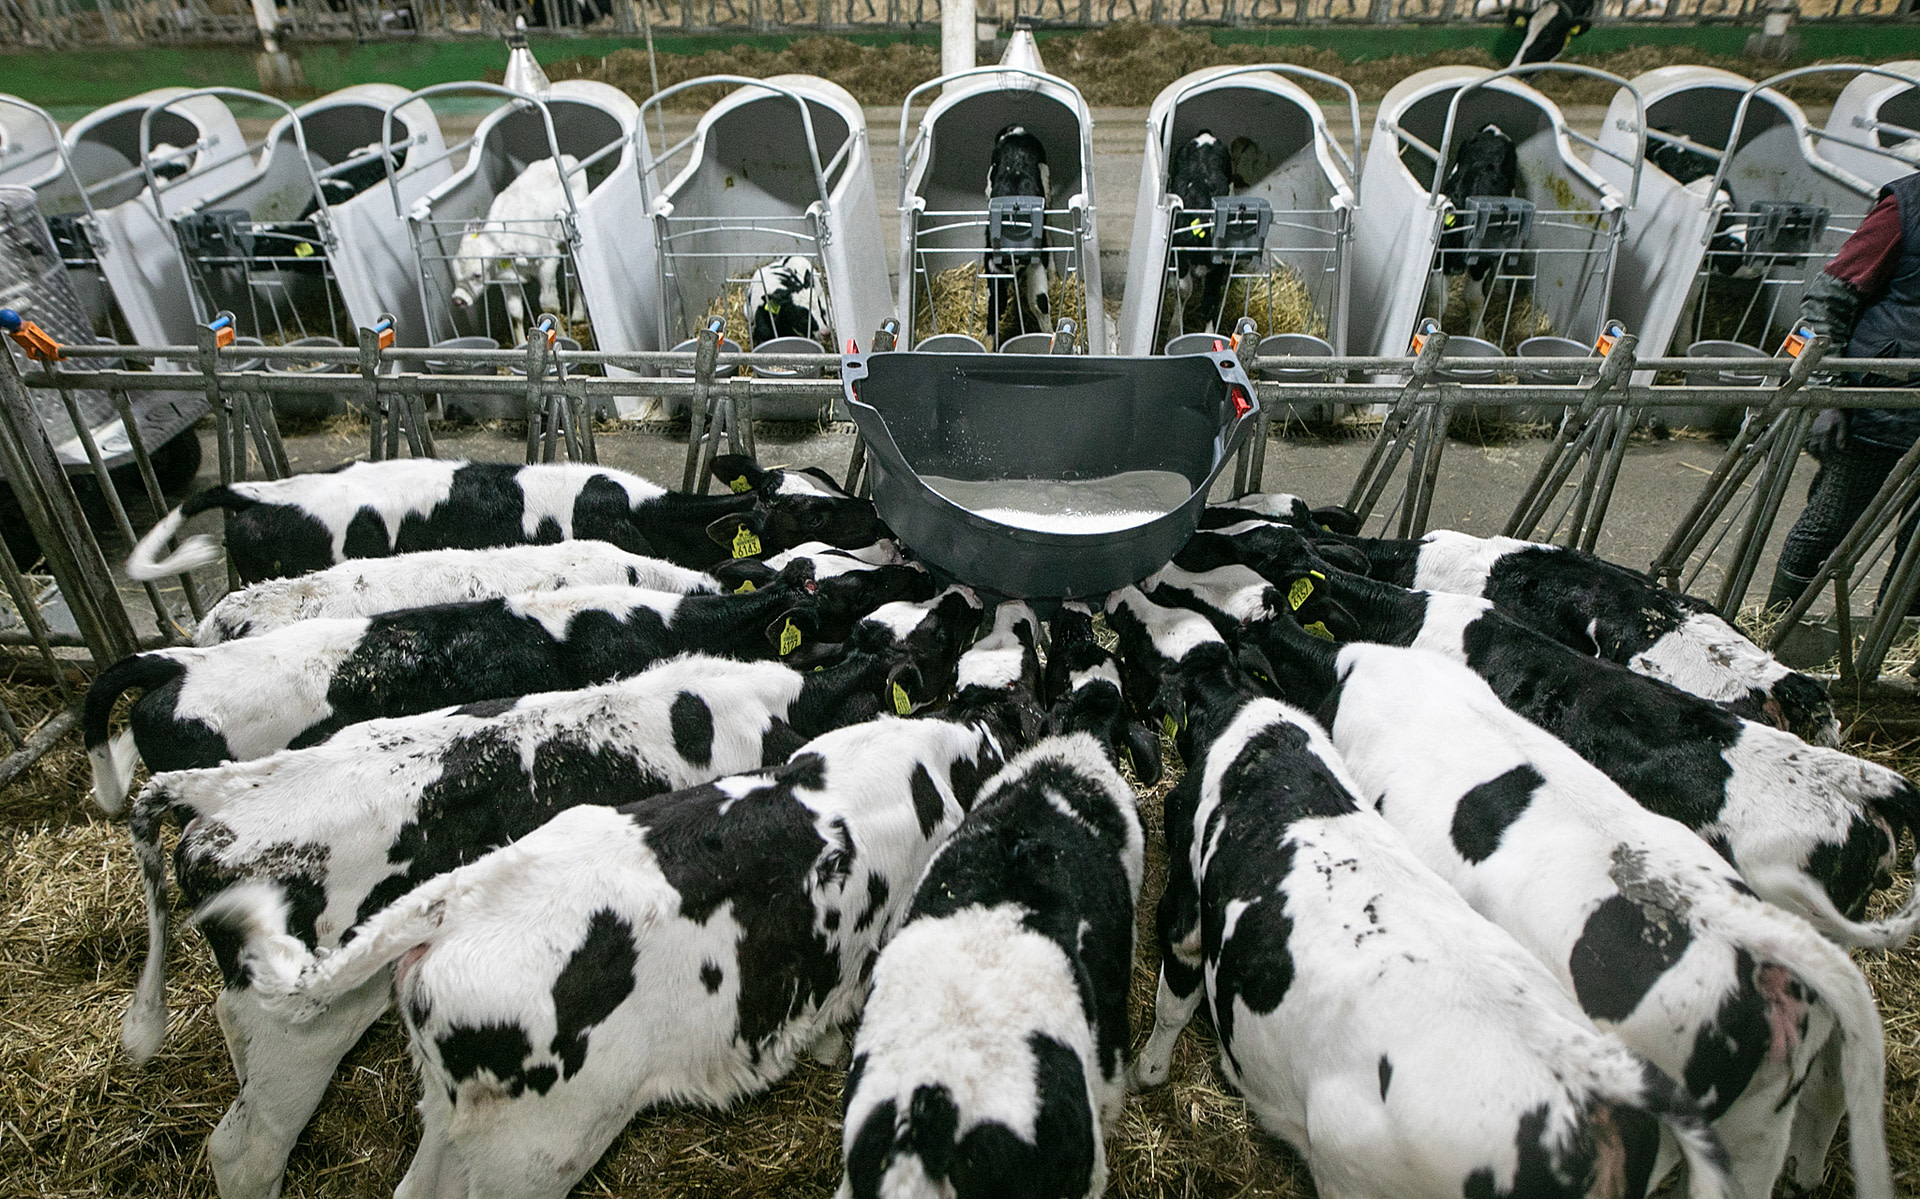 Calves drink milk together from a feeder through artificial nipples on a Polish dairy farm. These calves are several months of age and live in group housing after spending their first few weeks in individual calf hutches. These calves are fed twice daily and are not yet divided by gender. Poland, 2020. Andrew Skowron / We Animals Media